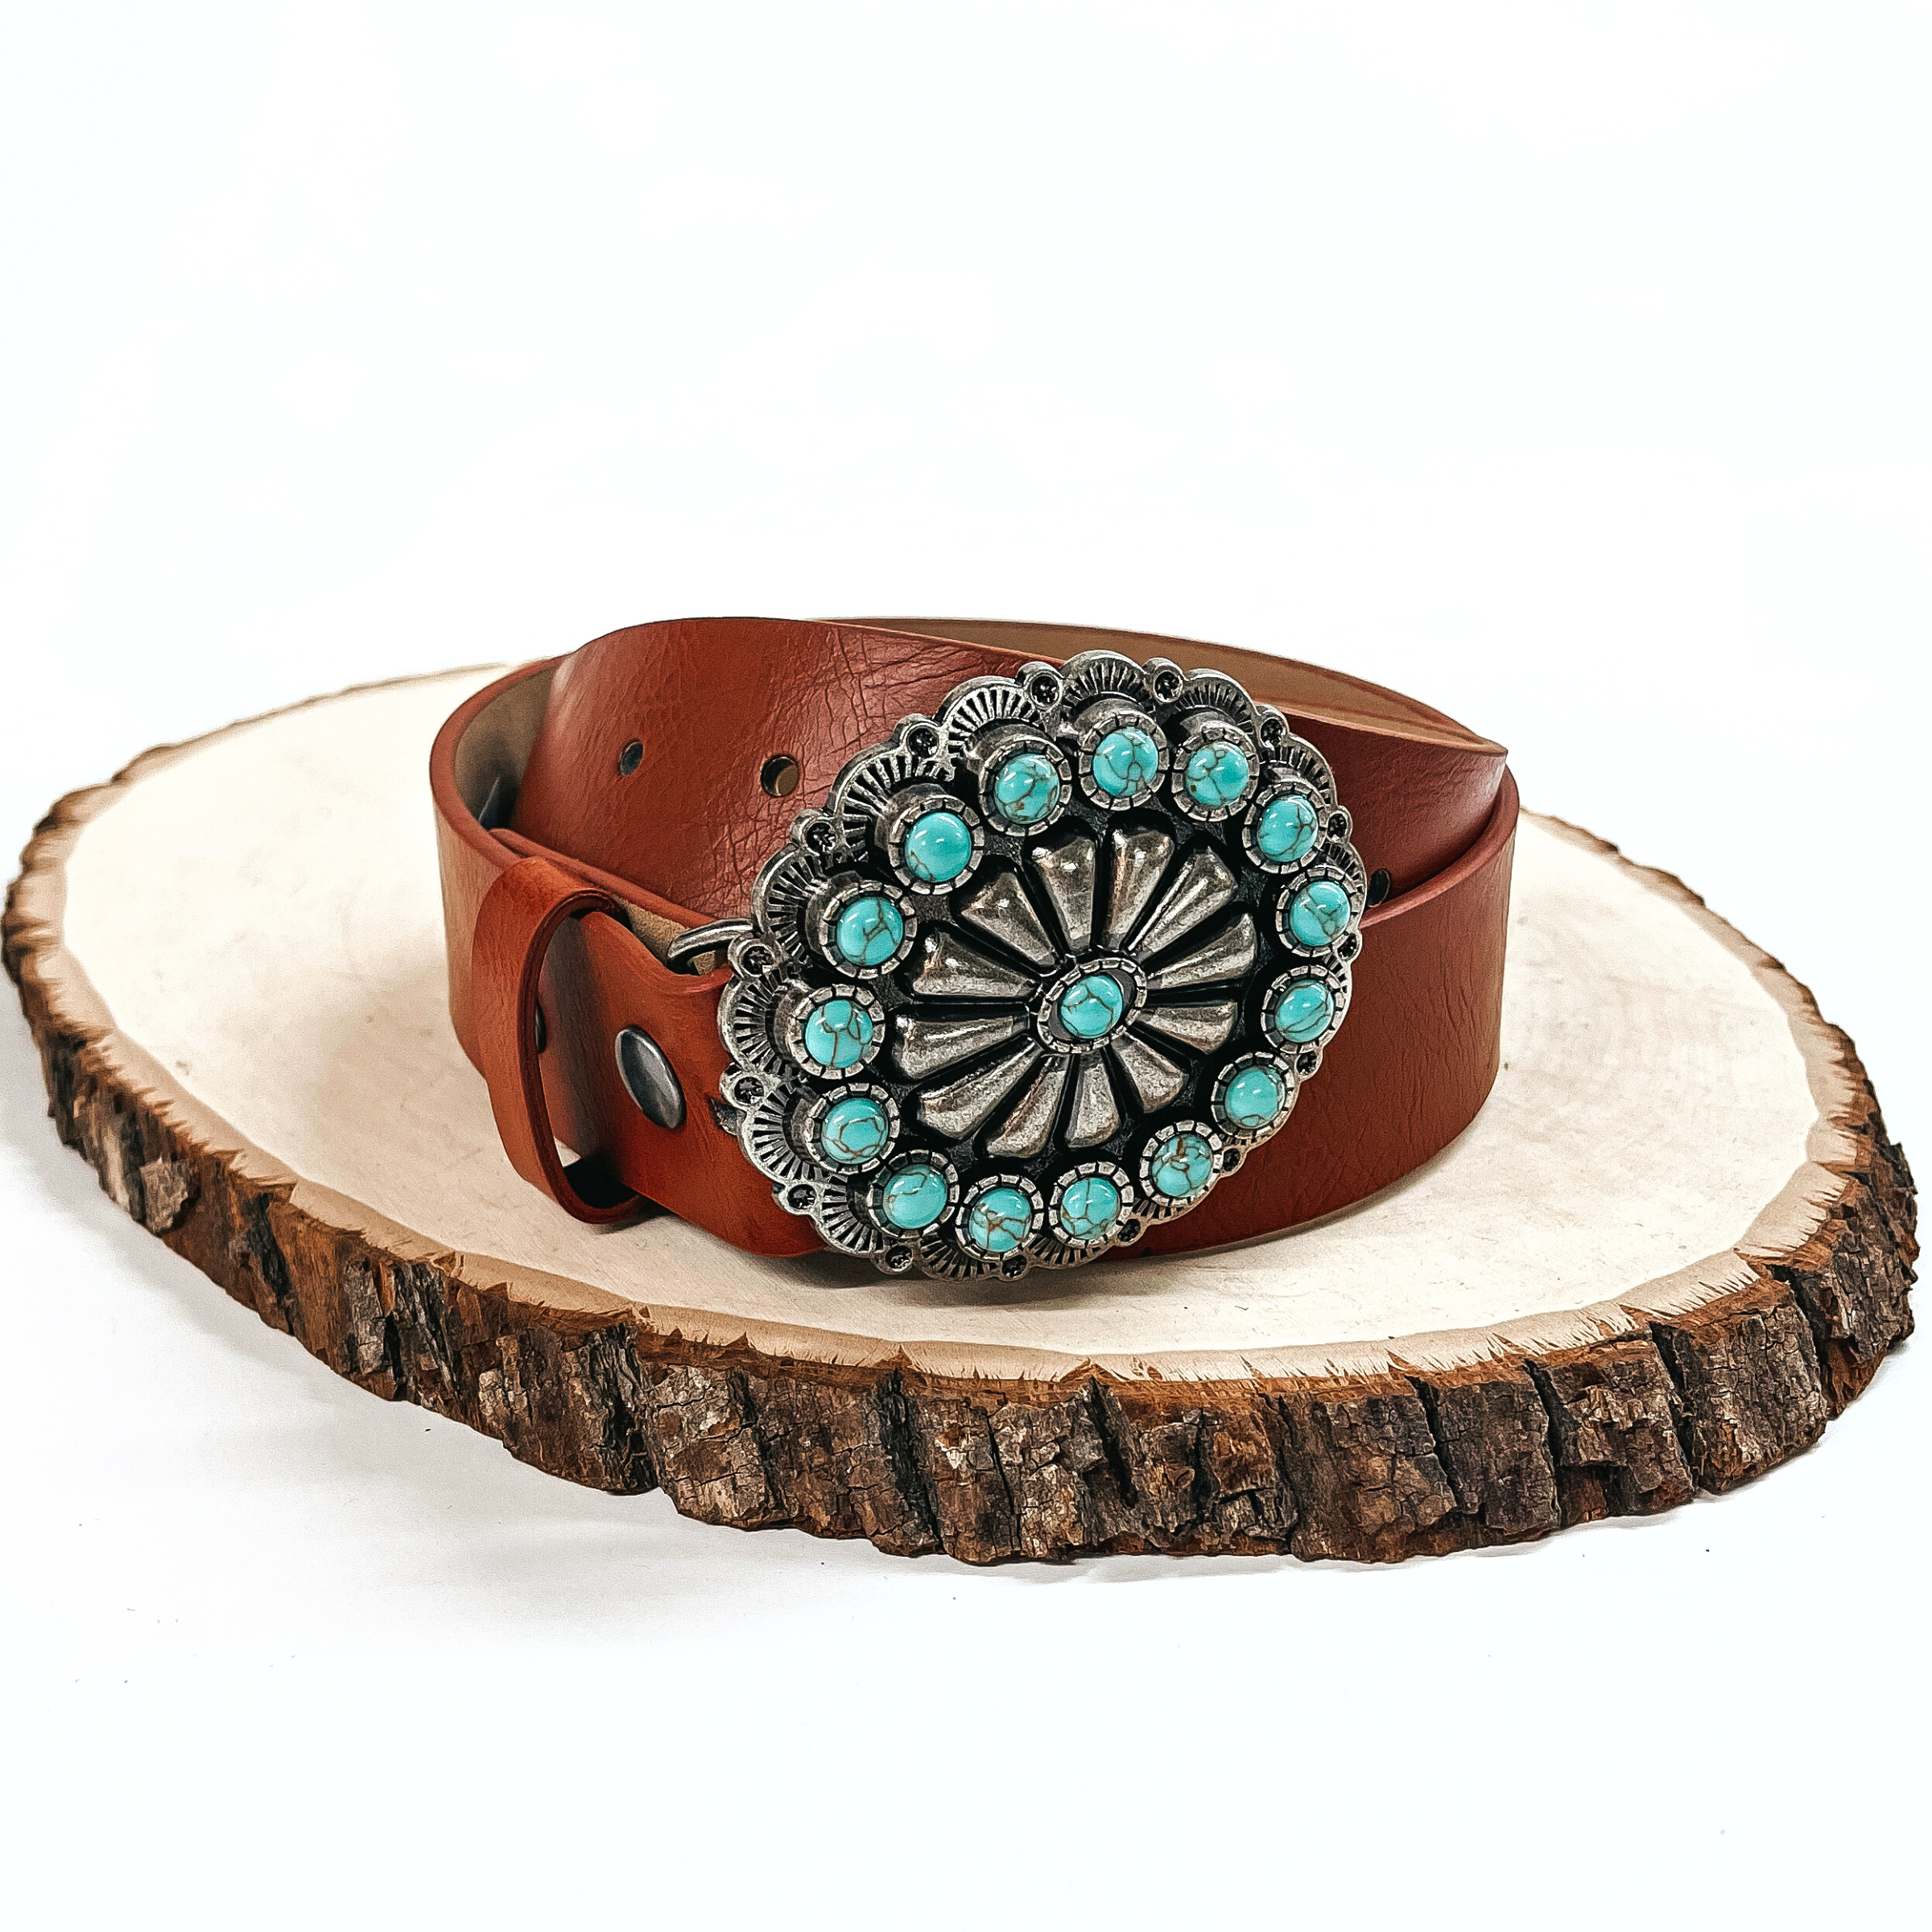 There is a brown belt with a silver concho and small turquoise stones all  around. The belt is rolled up and placed on a slab of wood on a white  background.